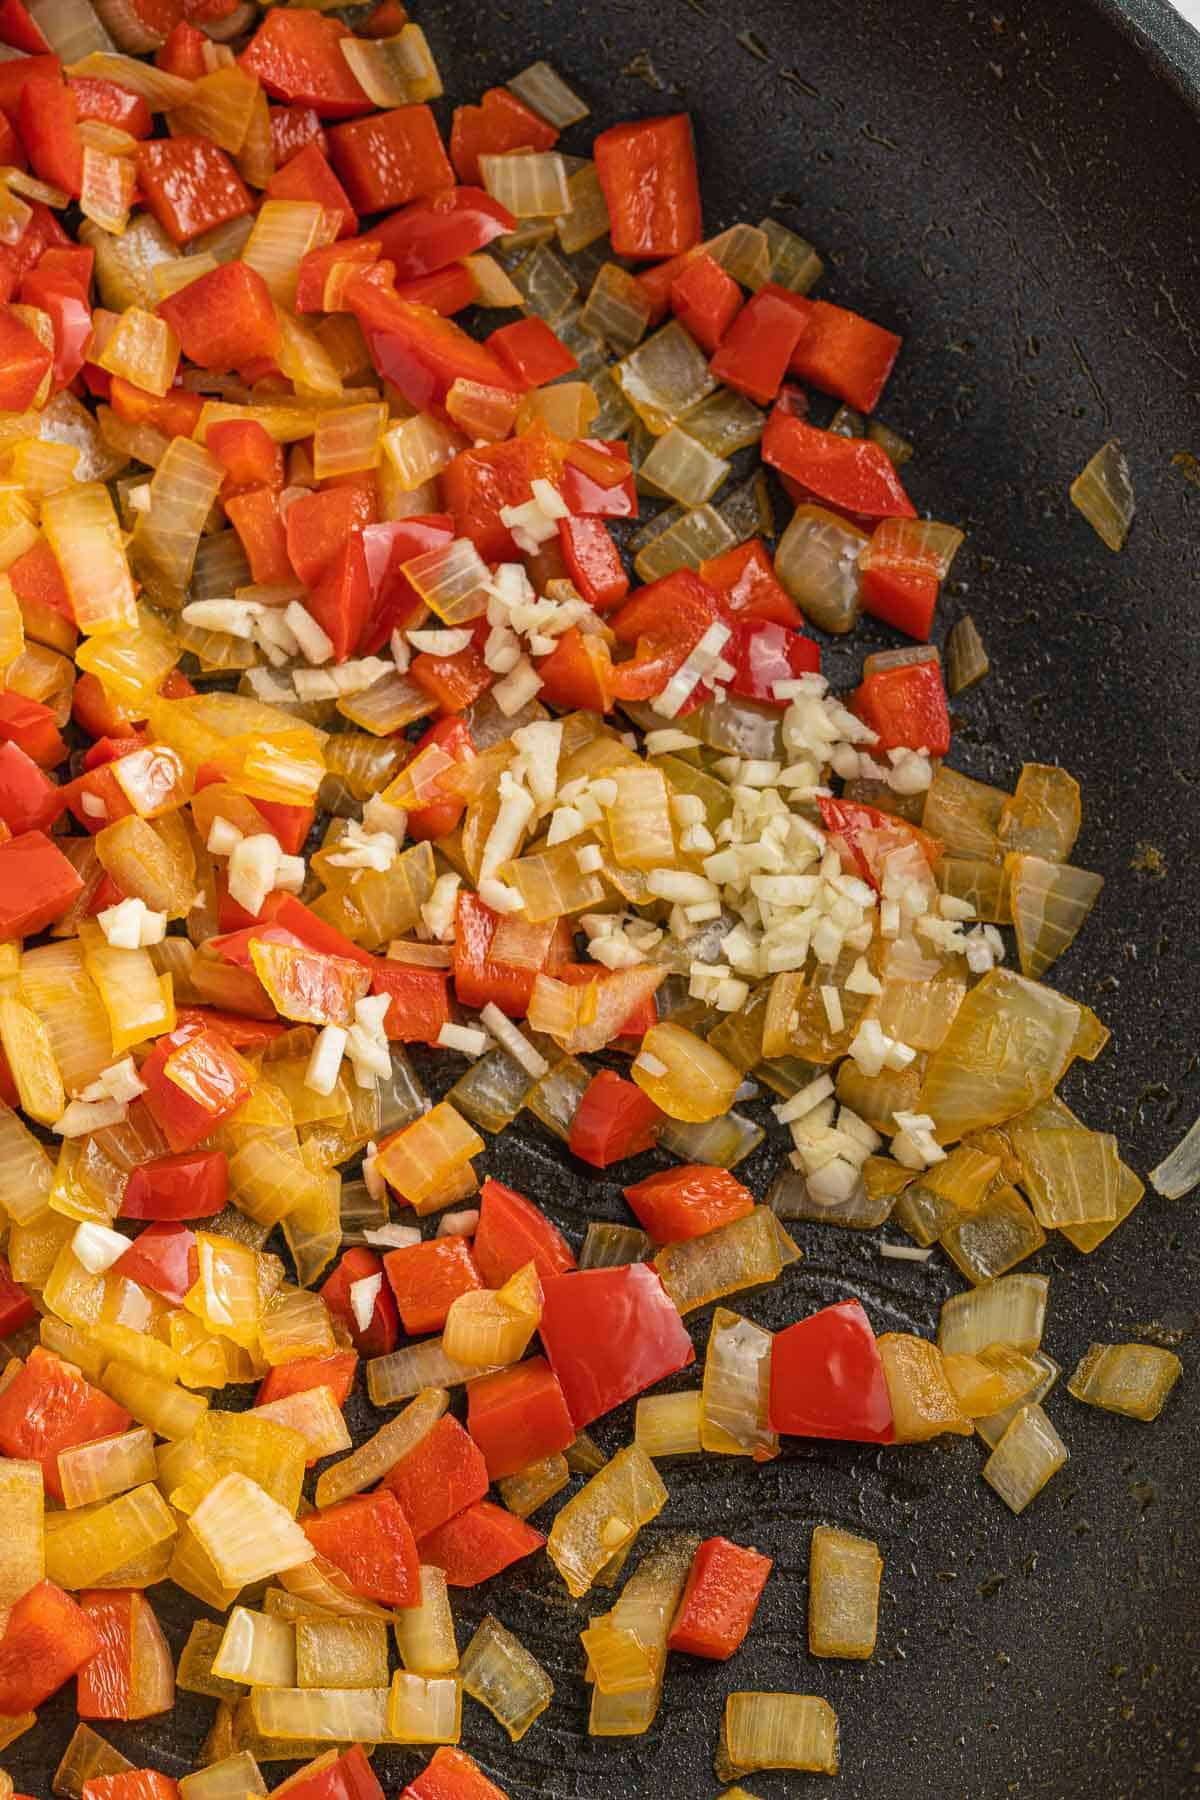 Sautéed onions and peppers.